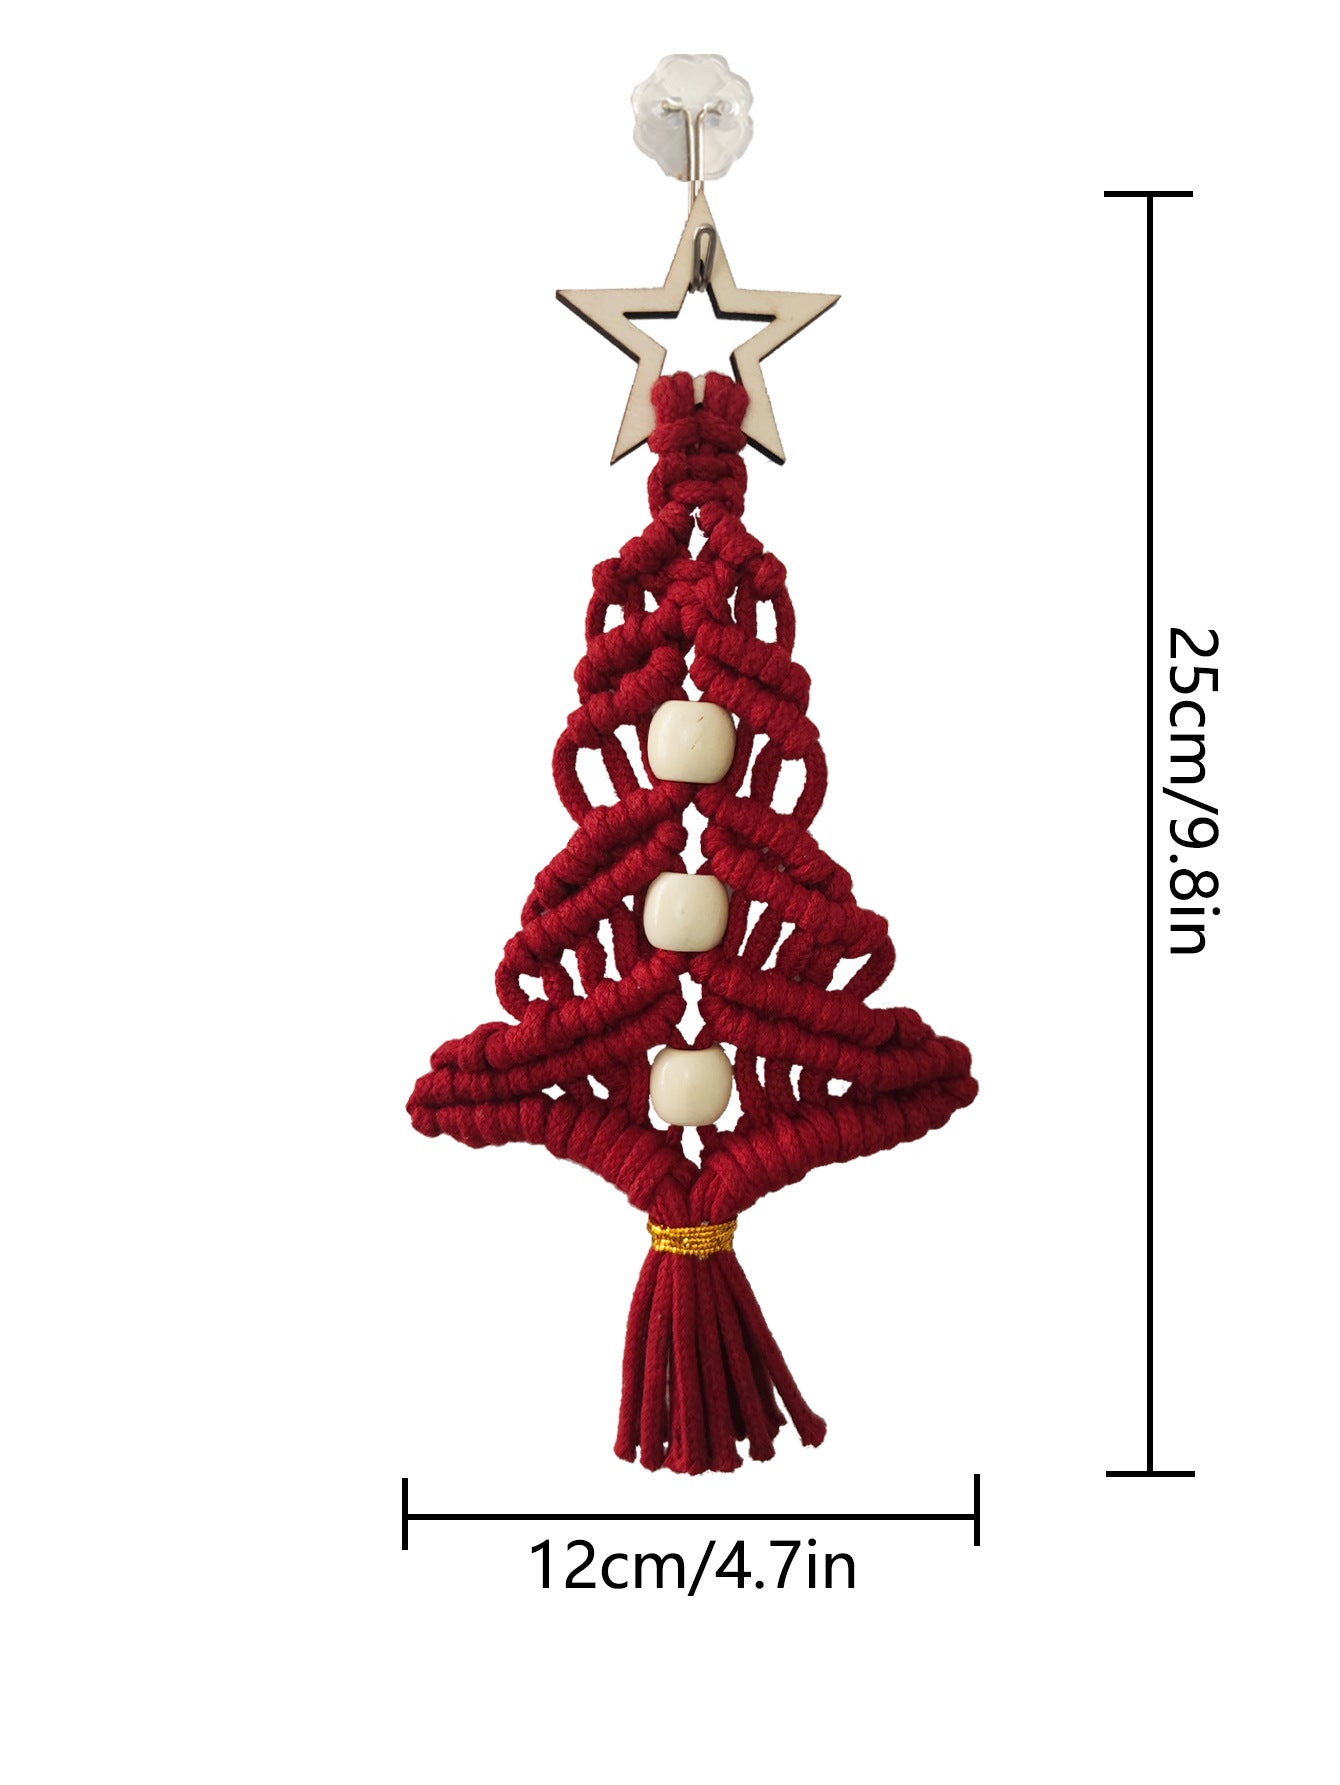 Hand-woven Creative Christmas Tree Ornaments Crafts